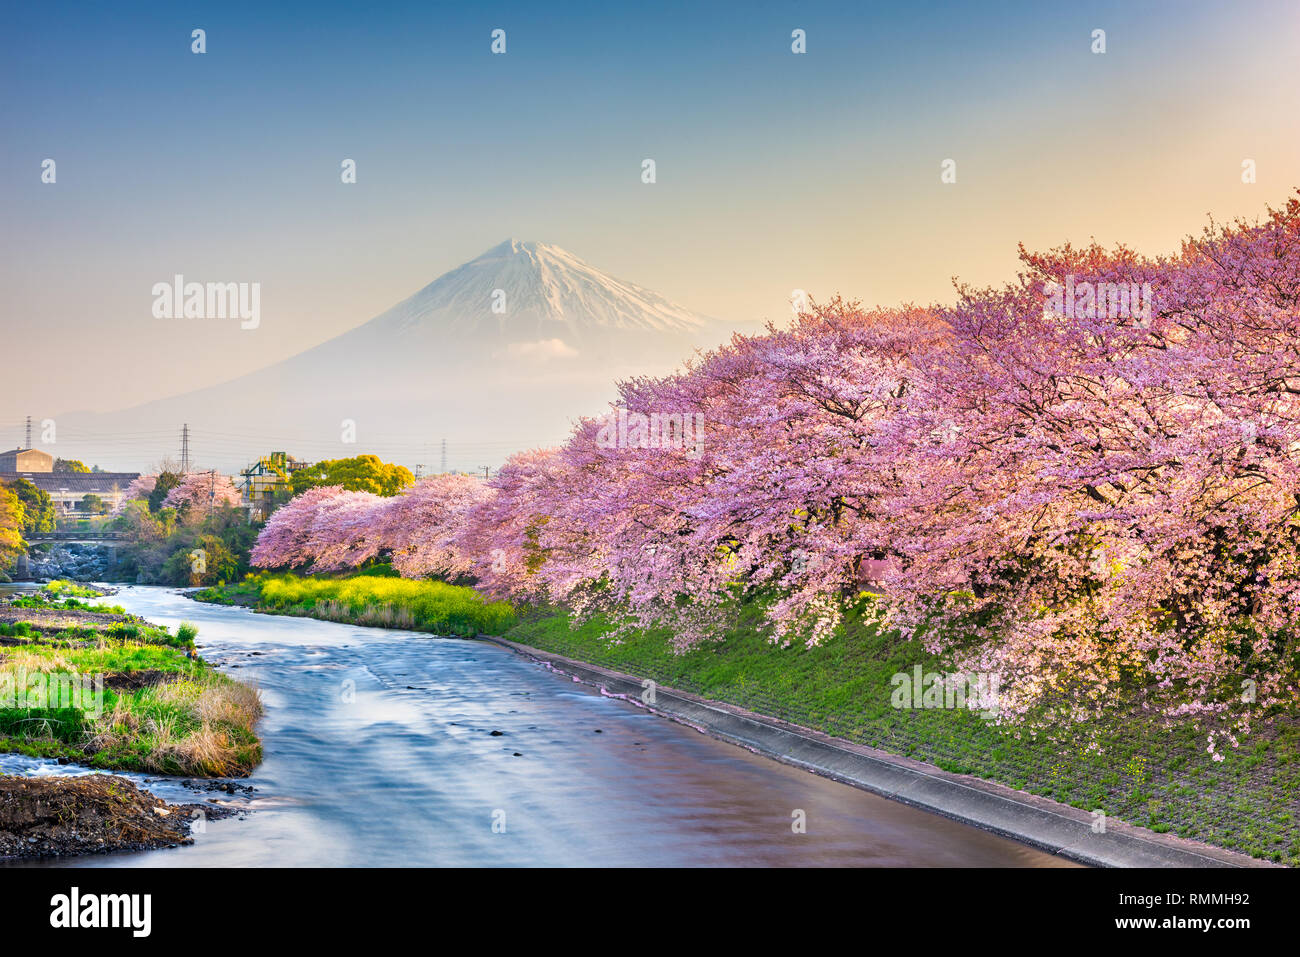 Mt. Fuji, Japan spring landscape and river with cherry blossoms. Stock Photo